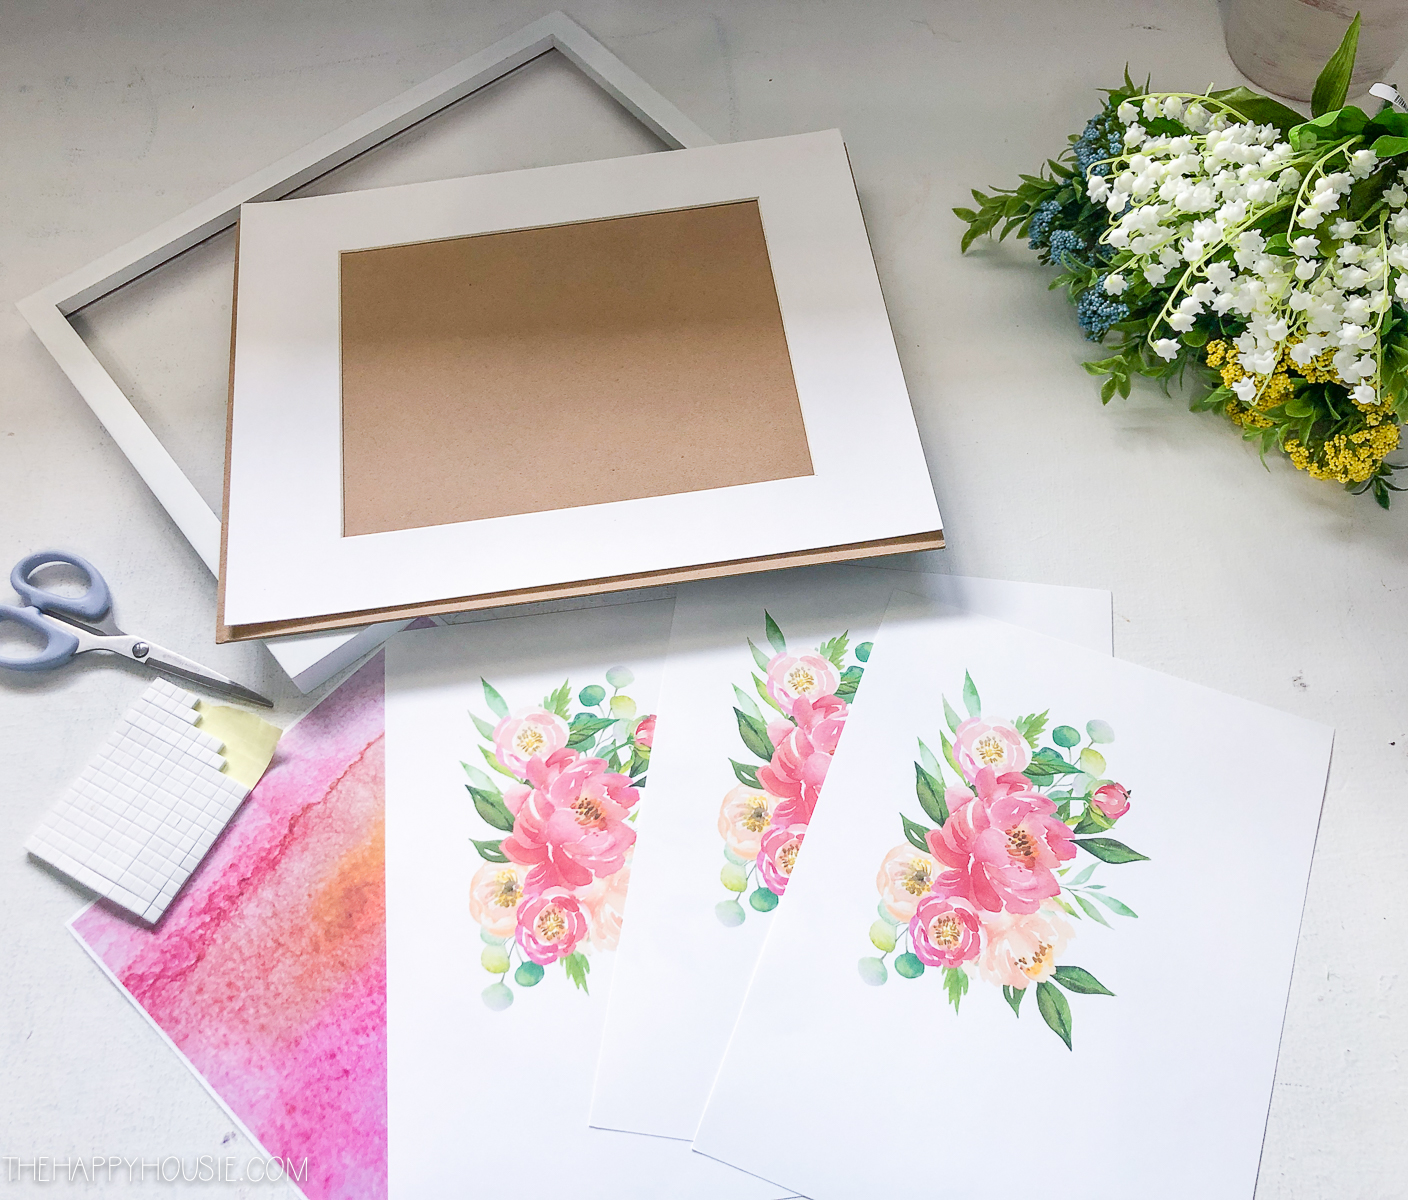 Watercolor printables on the table beside scissors.